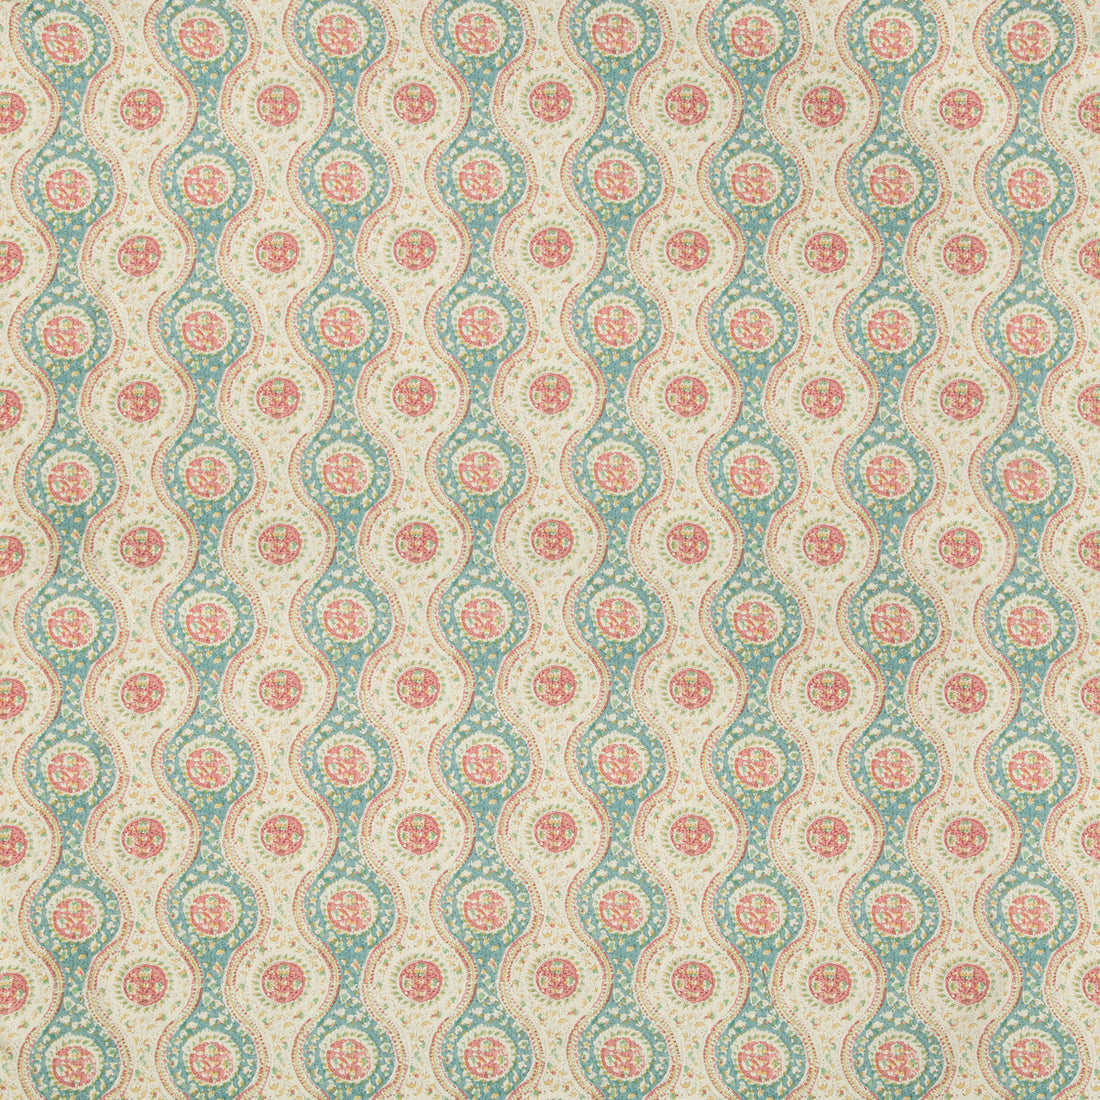 Nadari Print fabric in teal/rose color - pattern 8019129.137.0 - by Brunschwig &amp; Fils in the Folio Francais collection